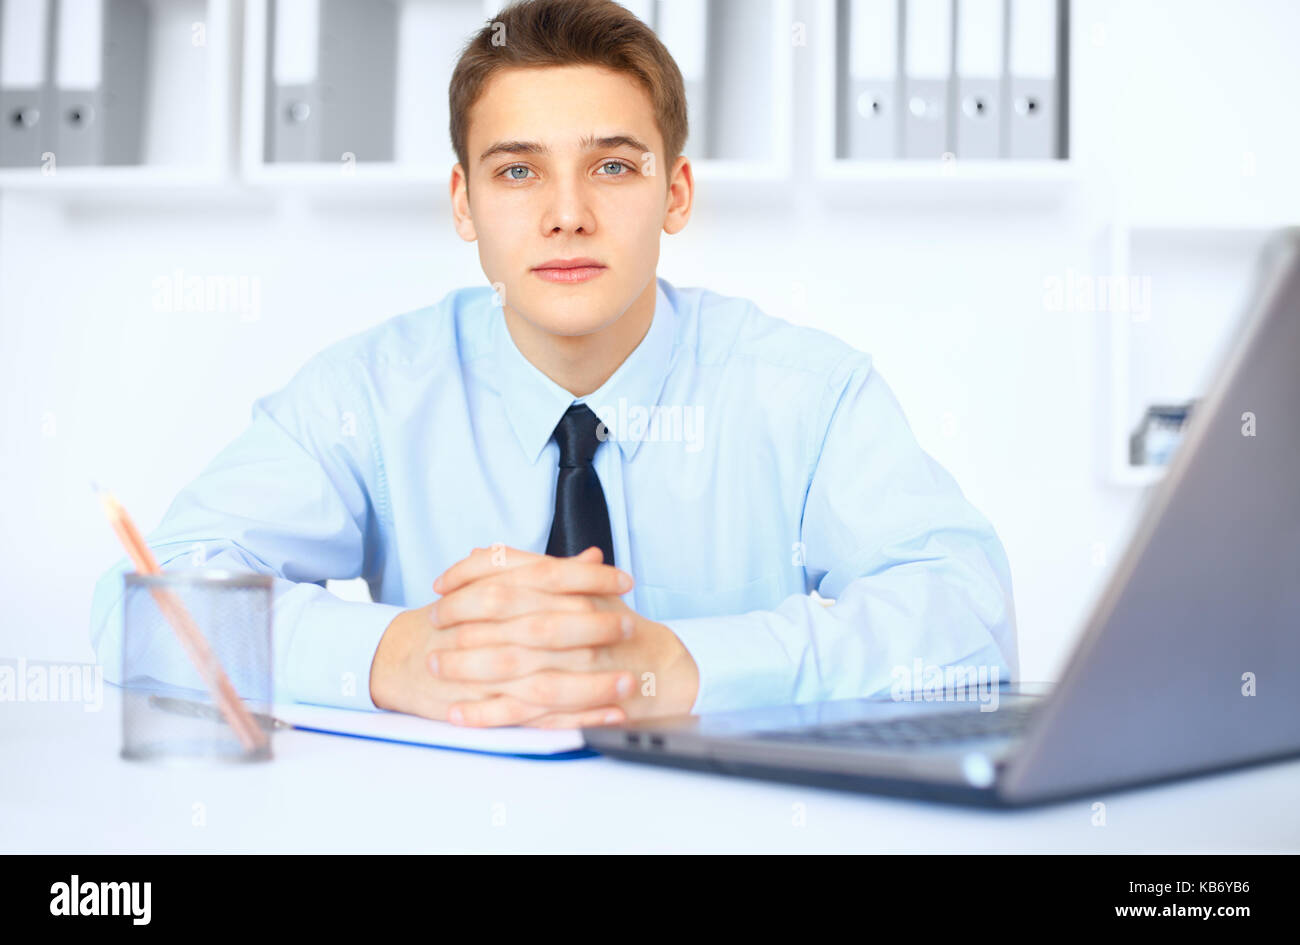 Portrait of young smiling businessman at his workplace in bright office Stock Photo